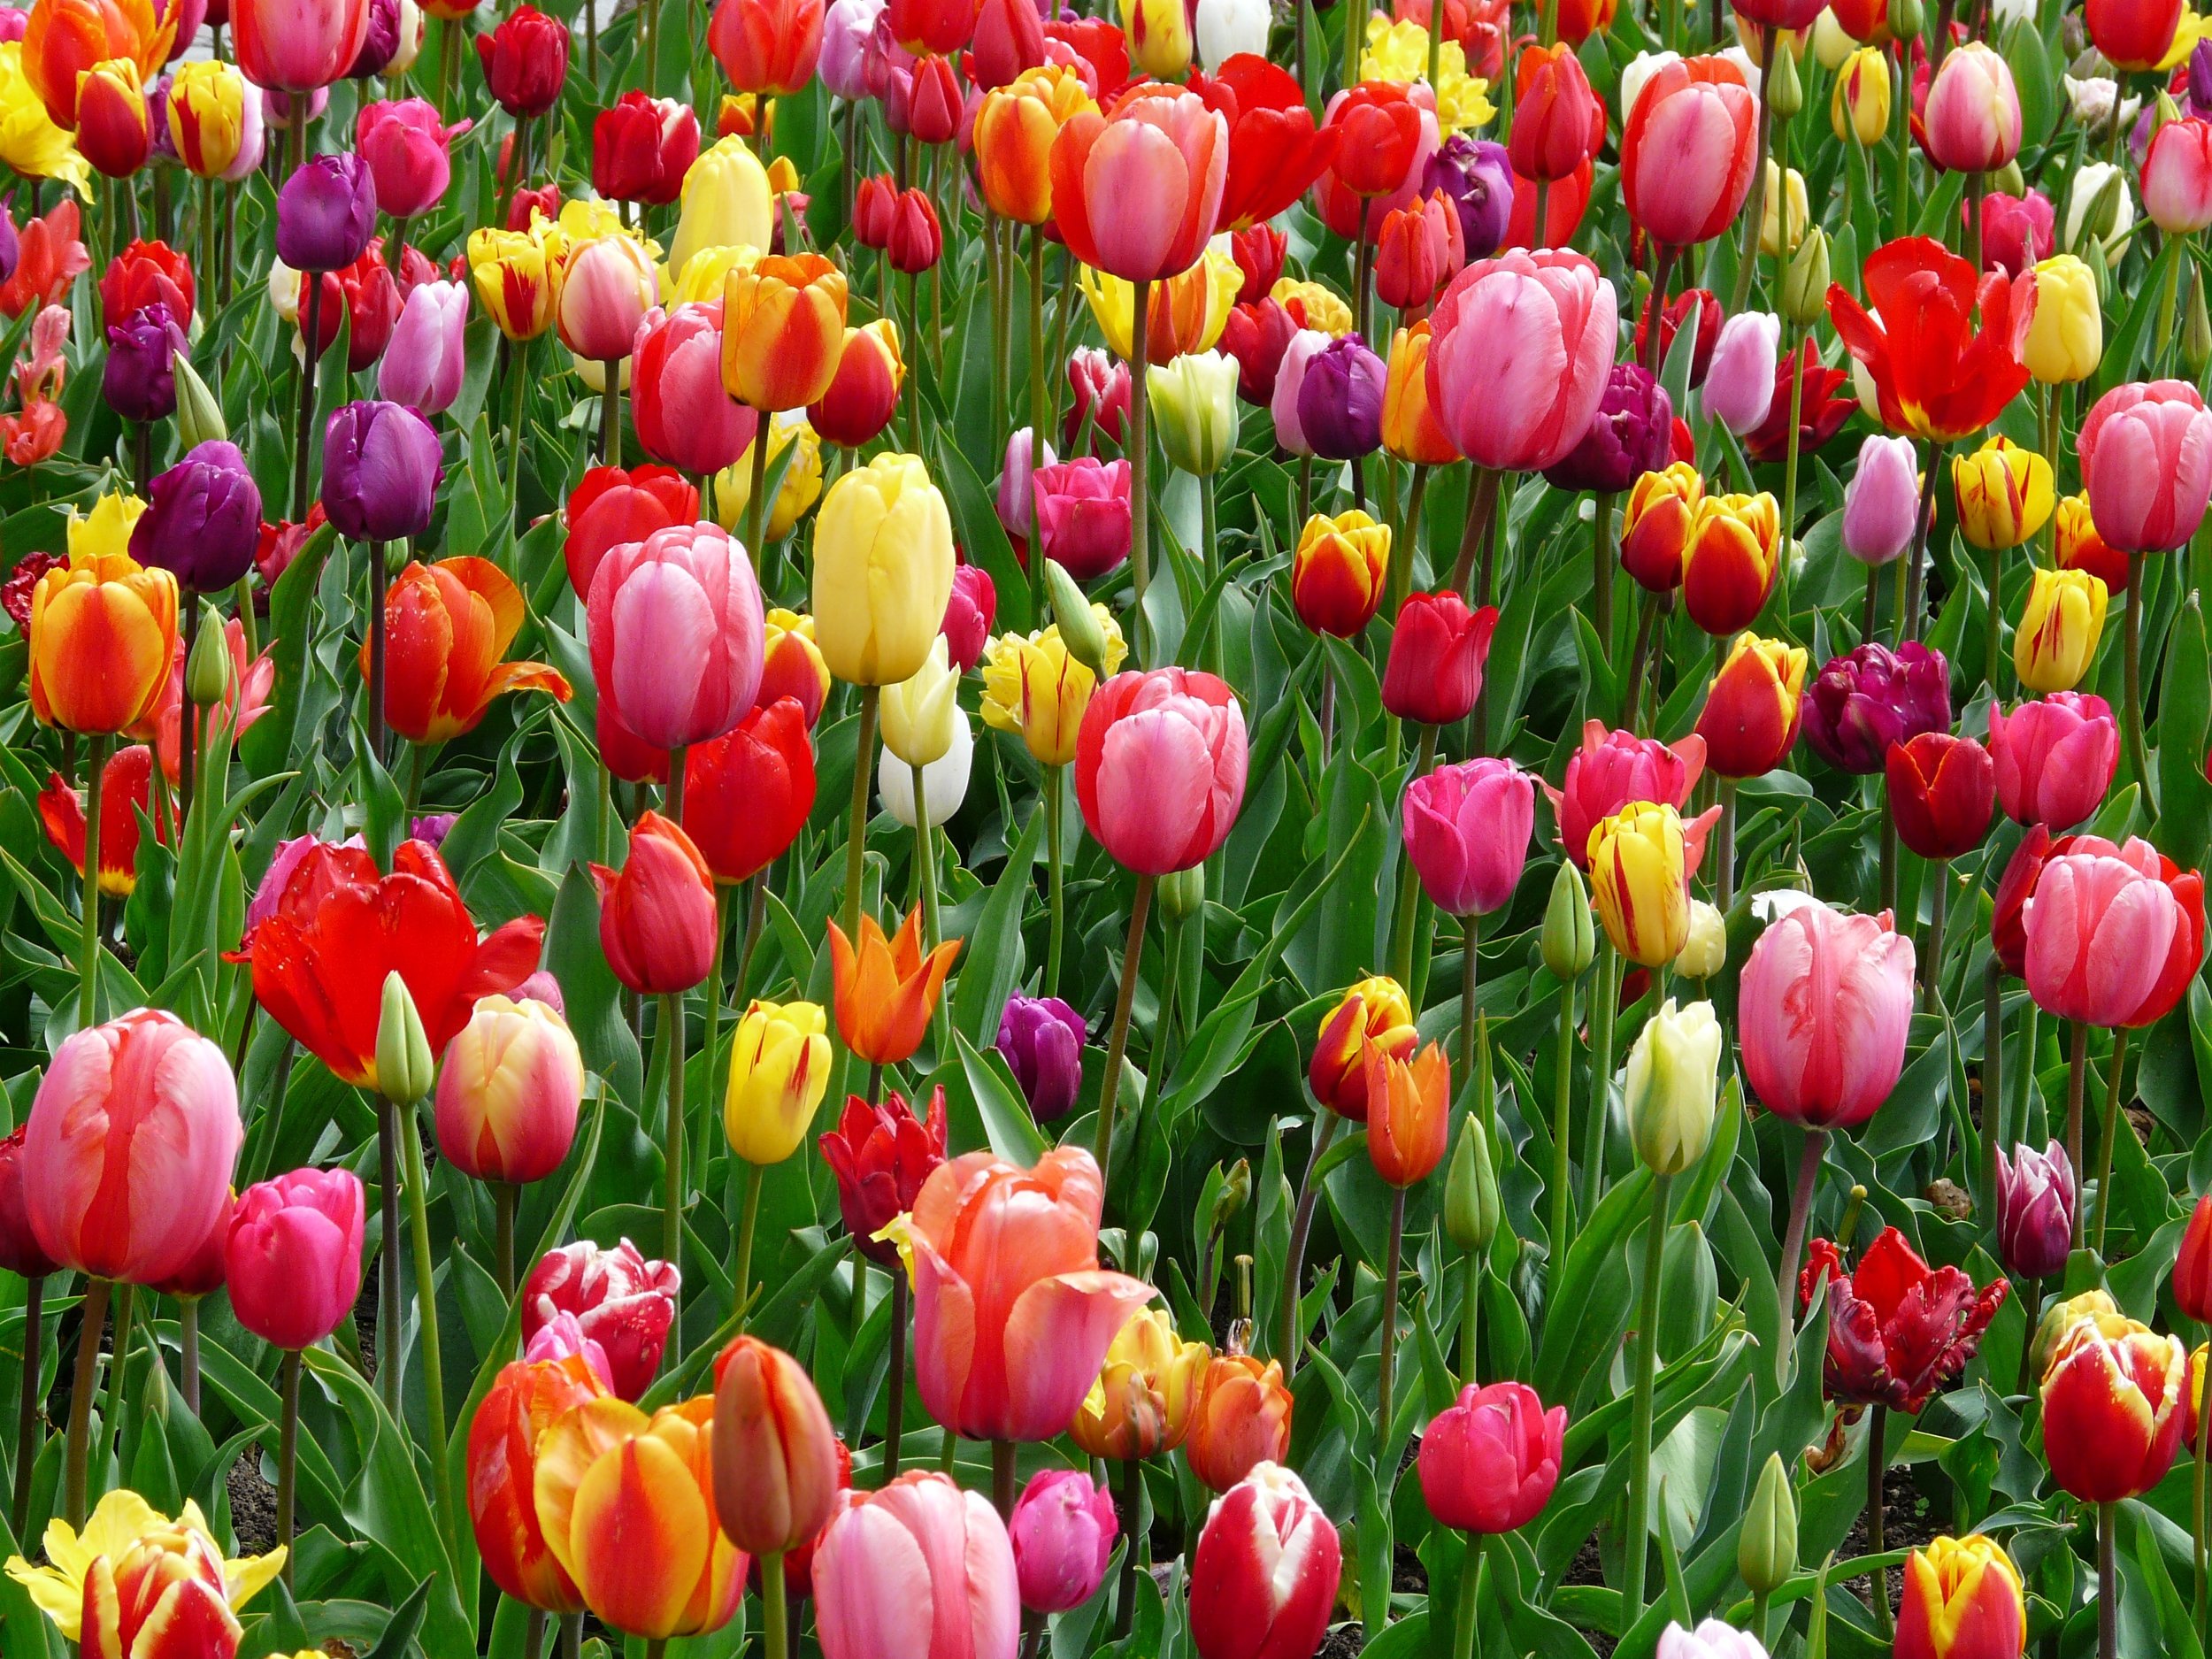 tulips-bed-colorful-color-69776.jpeg